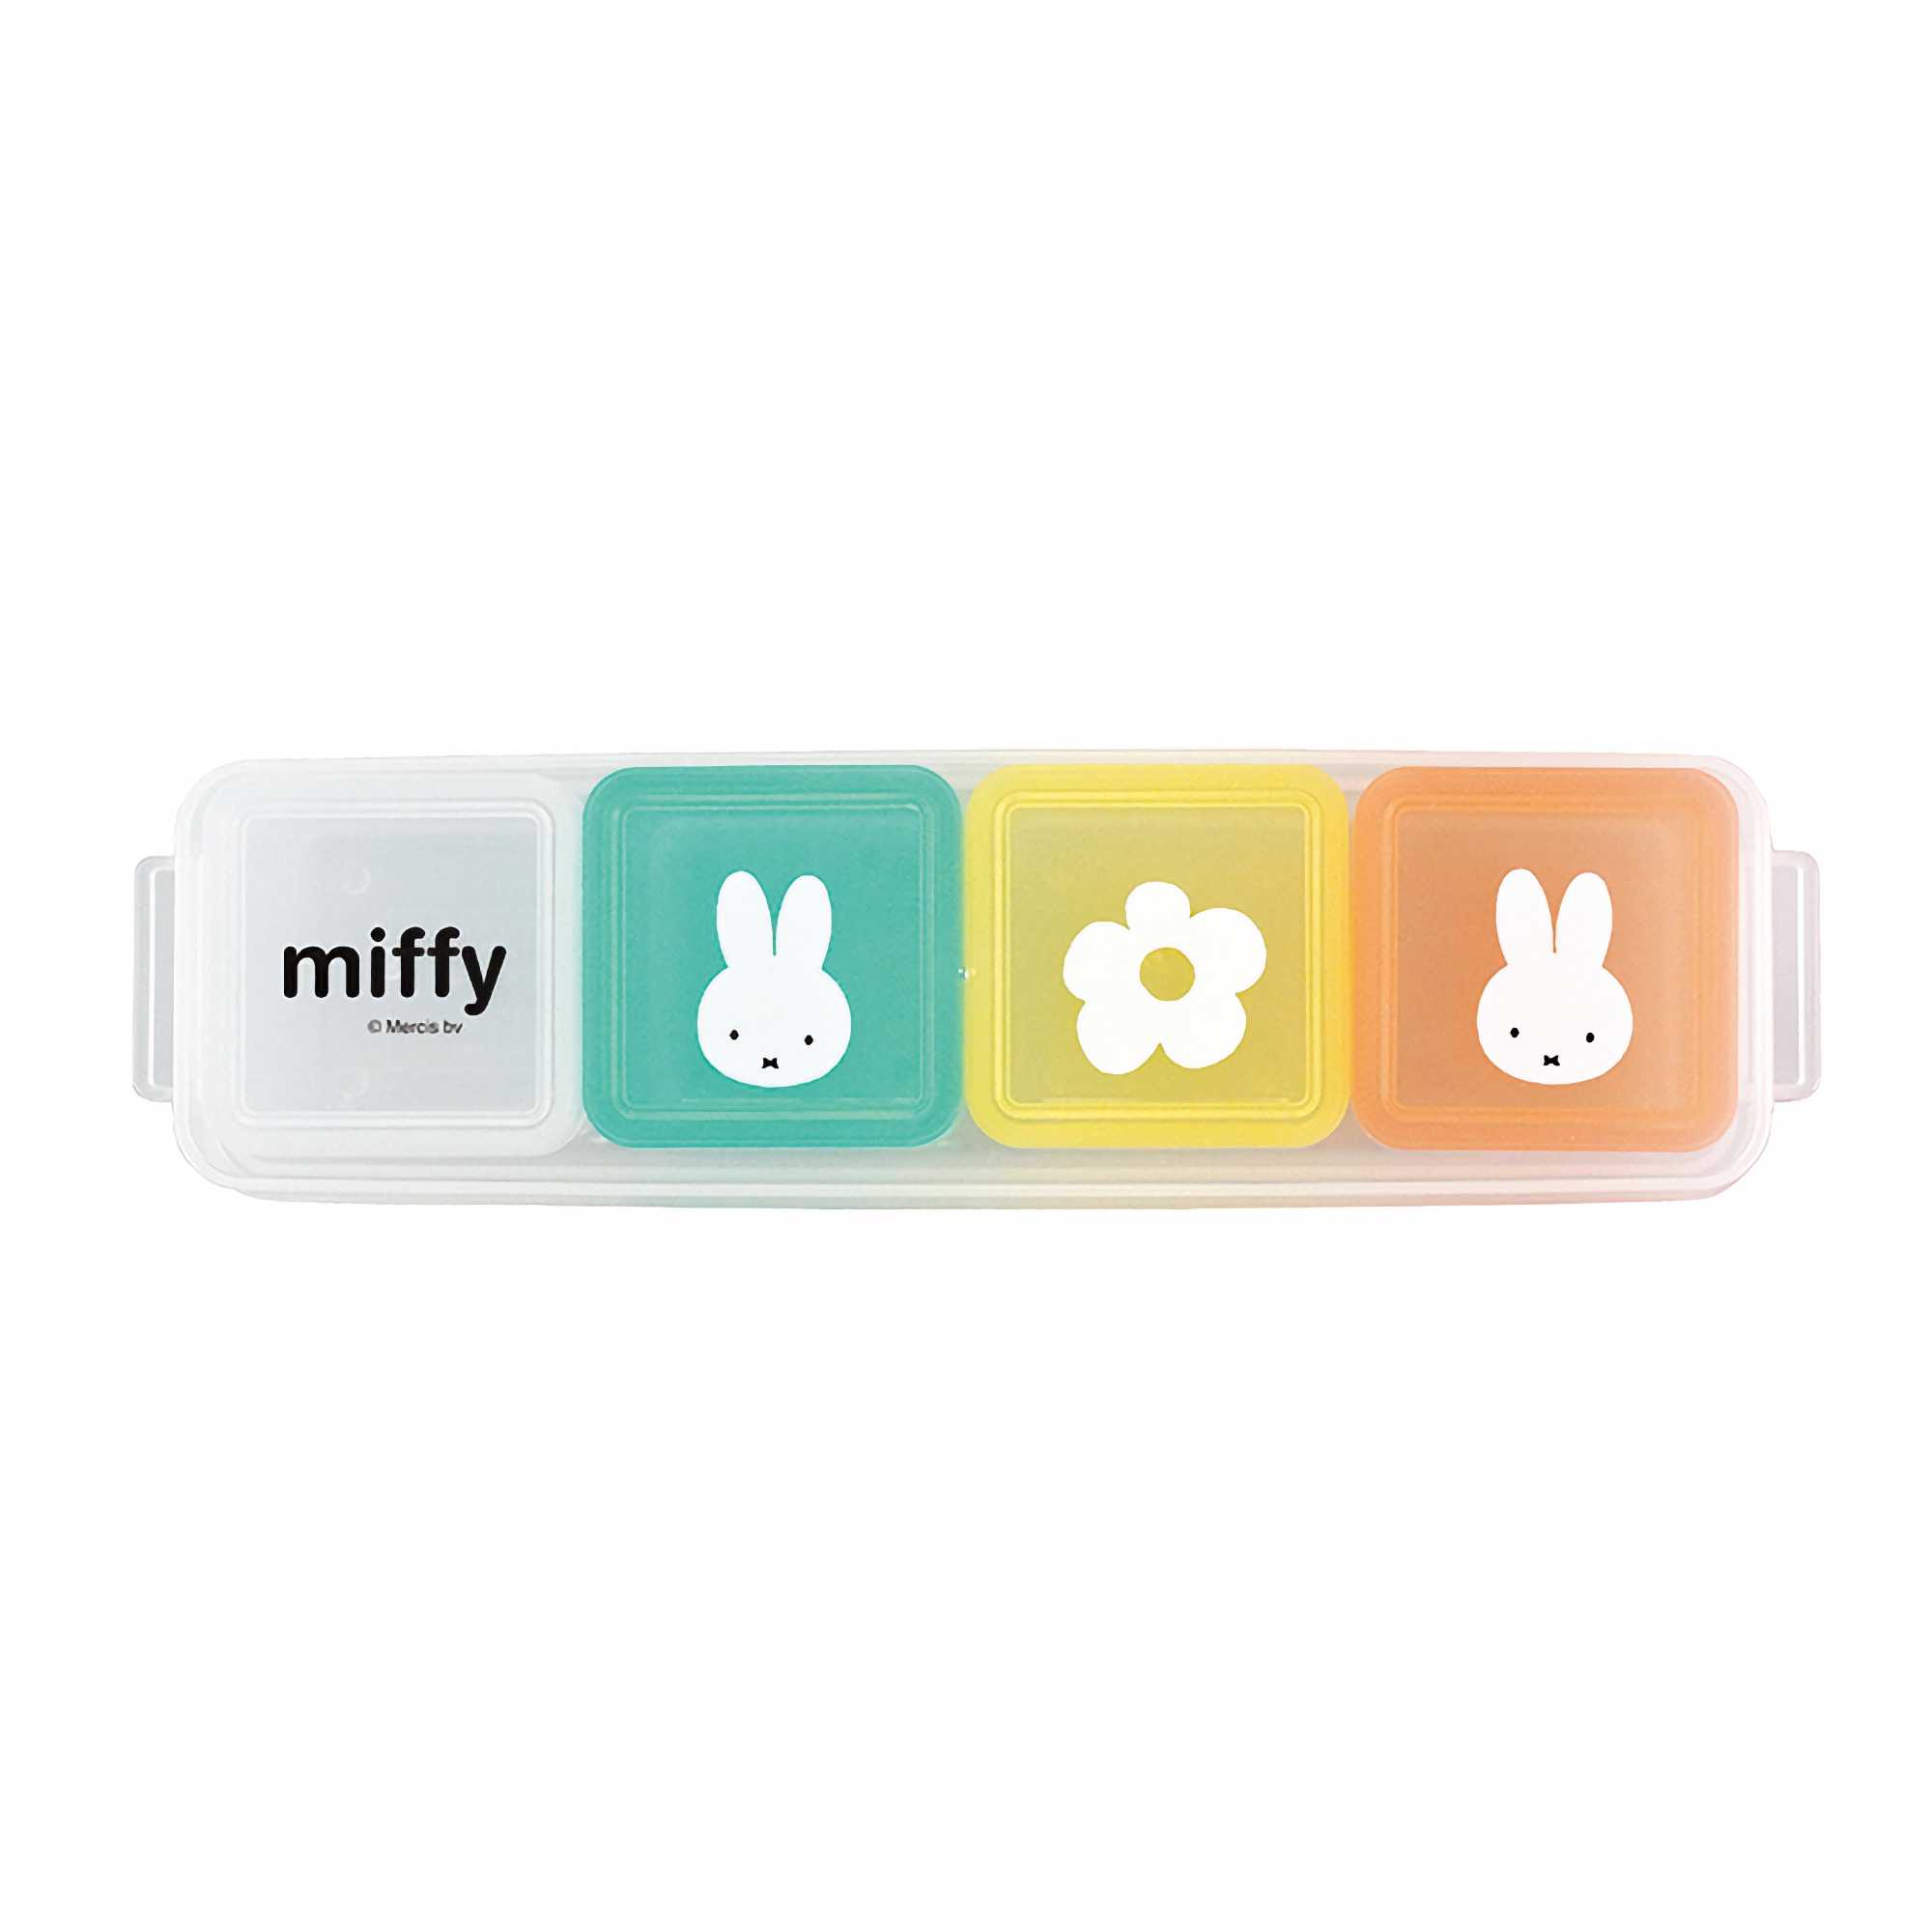 Miffy 4Cube Baby Food Container (100ml x 4)